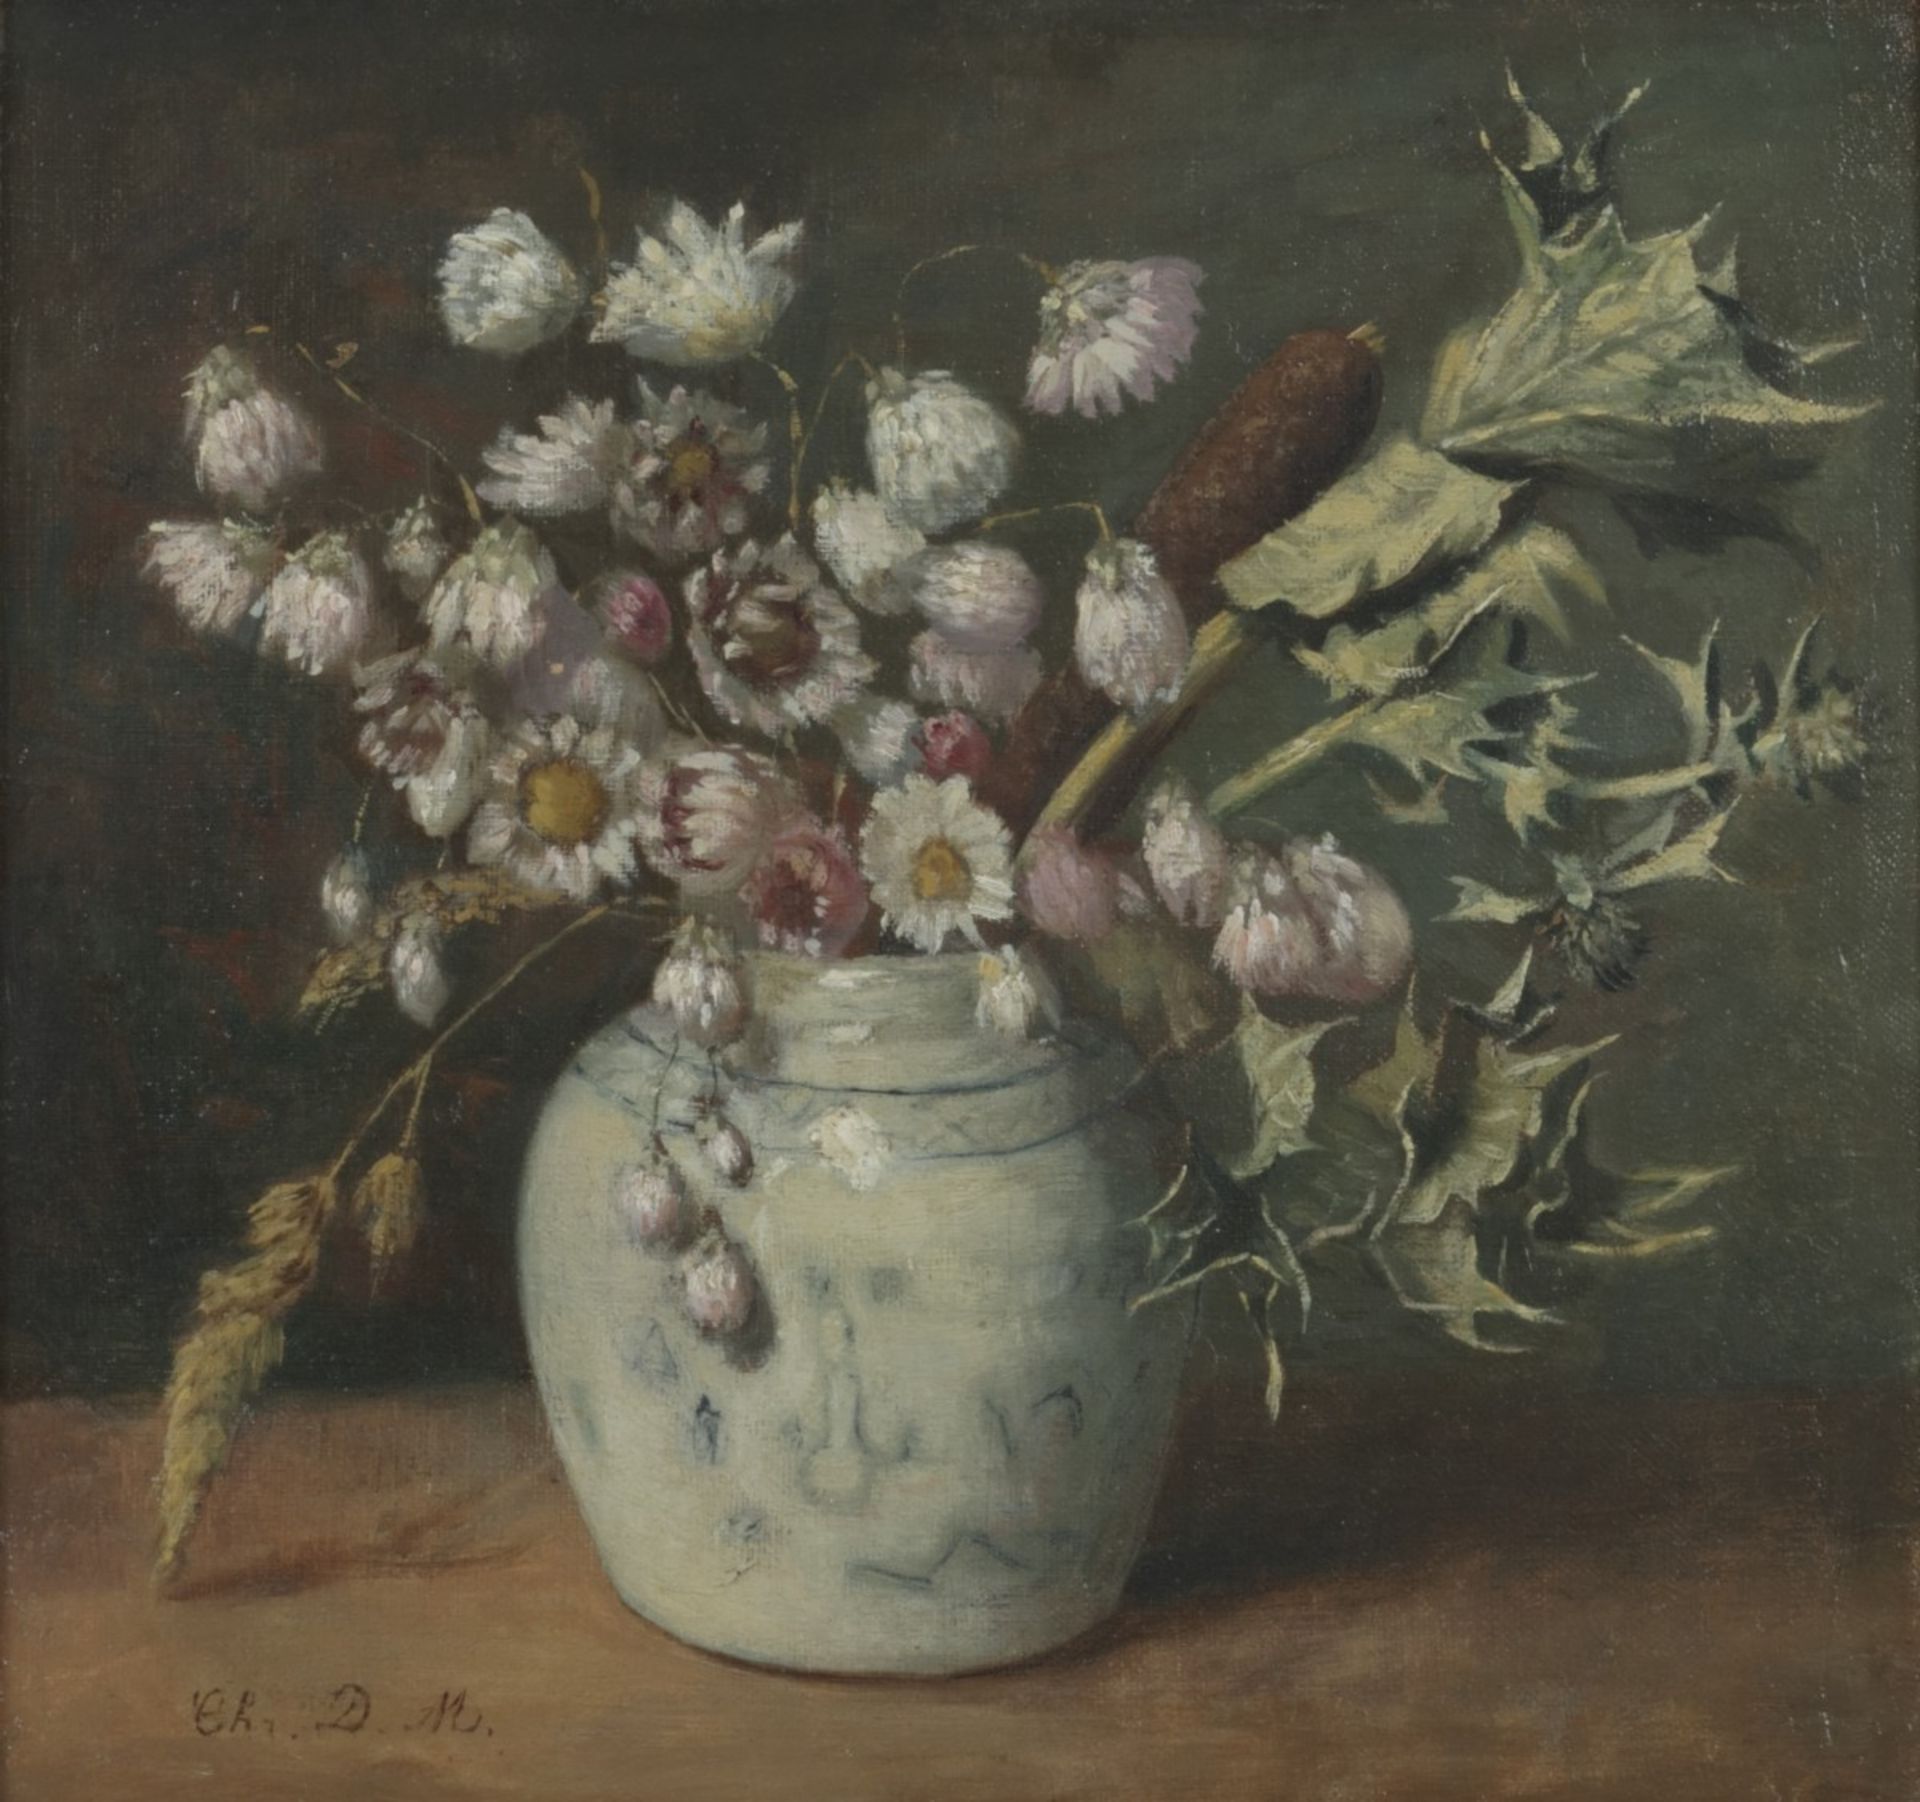 Christine Dorothea Meijer (Den Haag 1857 - 1932), A still life with flowers in a Chinese Pot